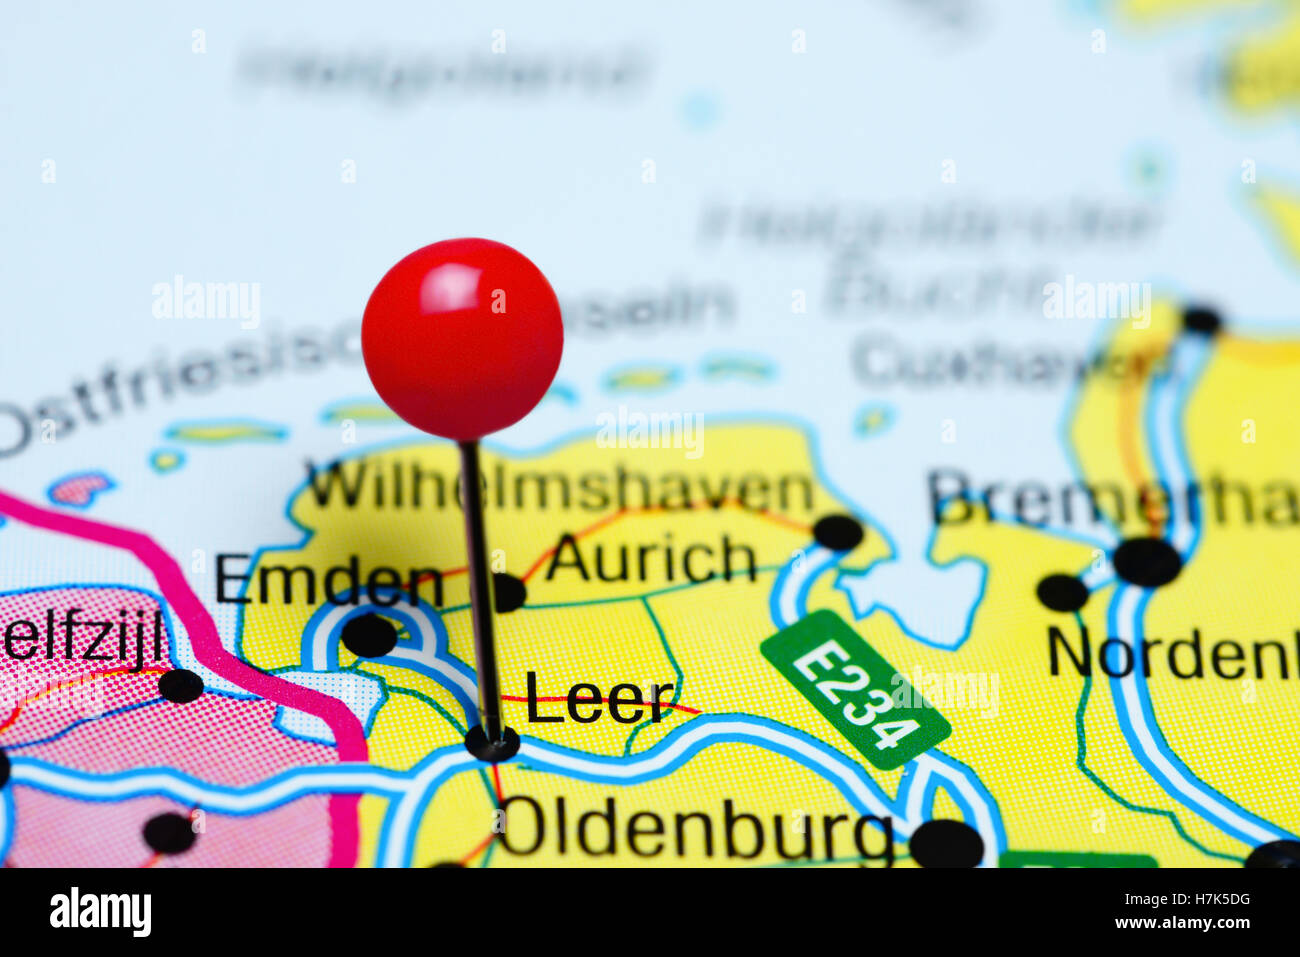 Leer pinned on a map of Germany Stock Photo